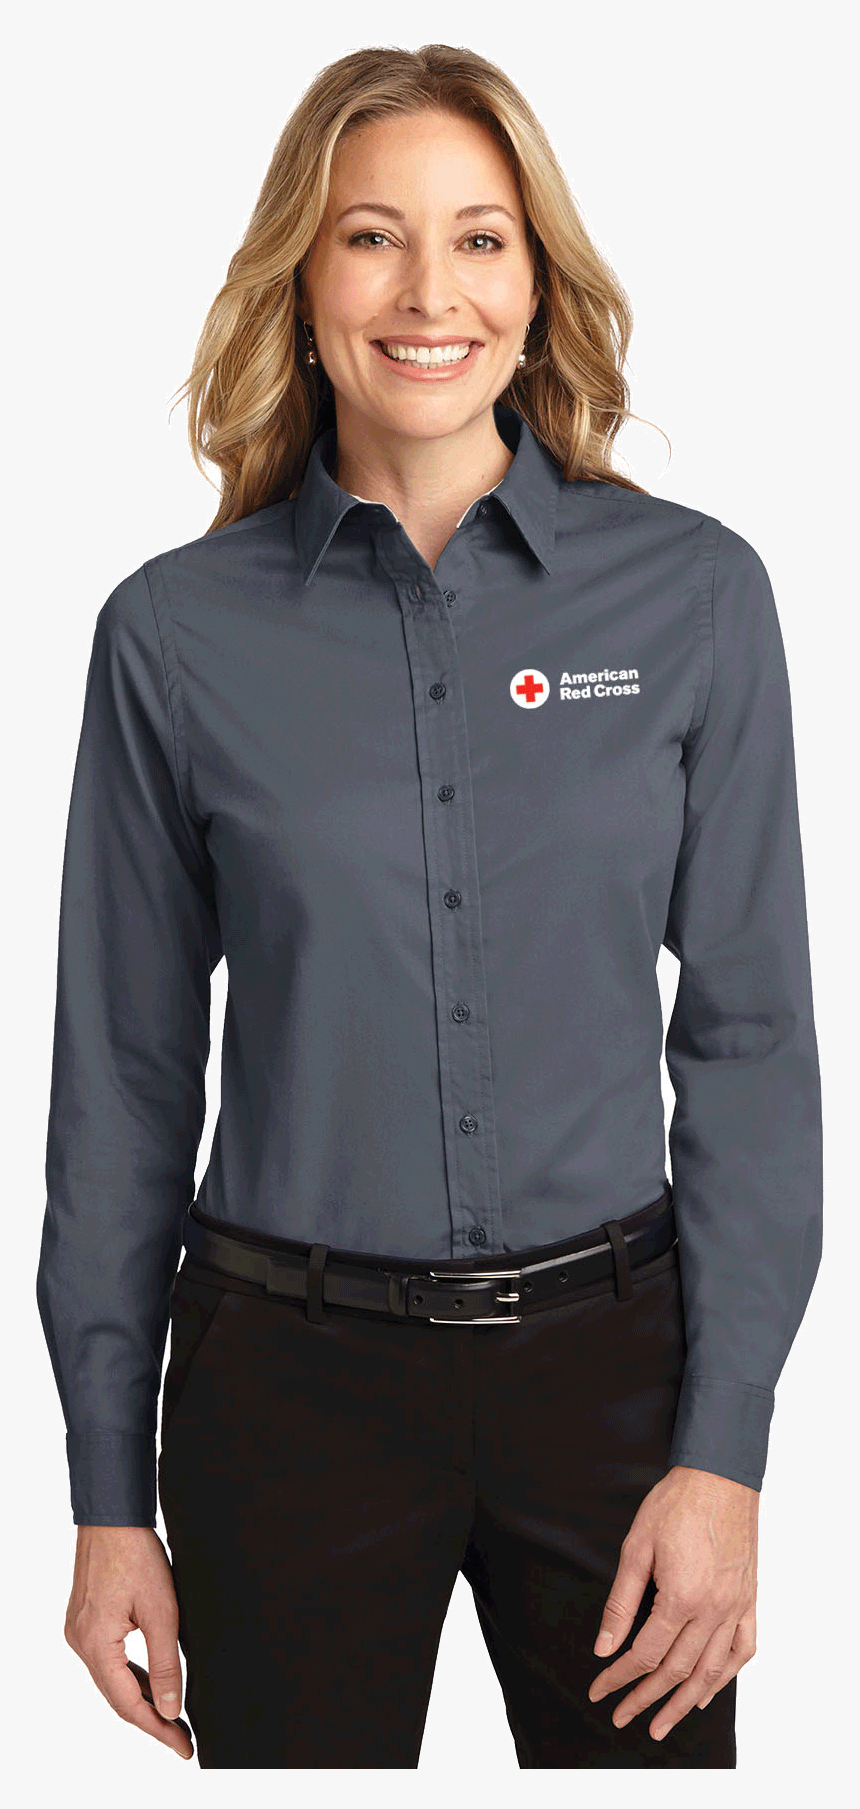 Women"s Button Up Oxford Dress Shirt With American - Port Authority Steel Grey, HD Png Download, Free Download